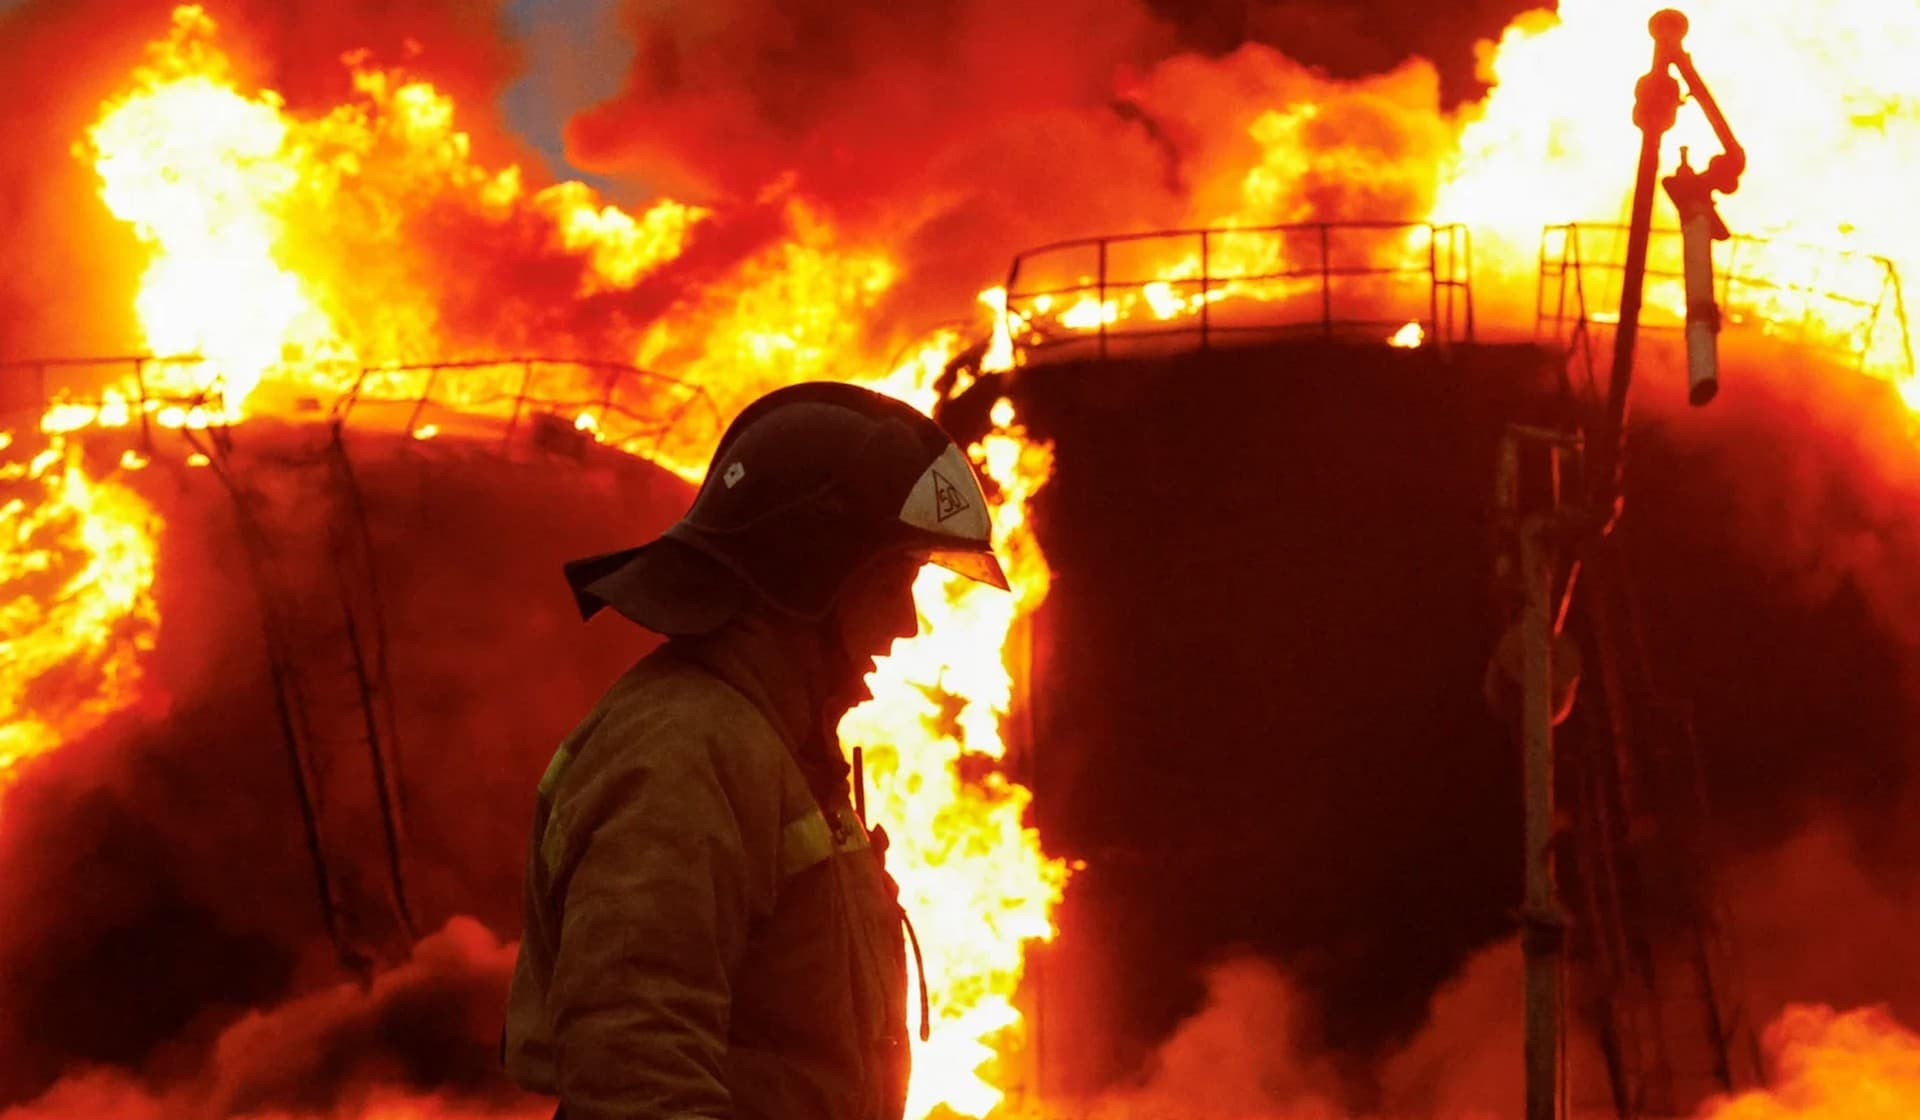 A firefighter works to extinguish fire following recent shelling at an oil storage facility in Shakhtarsk